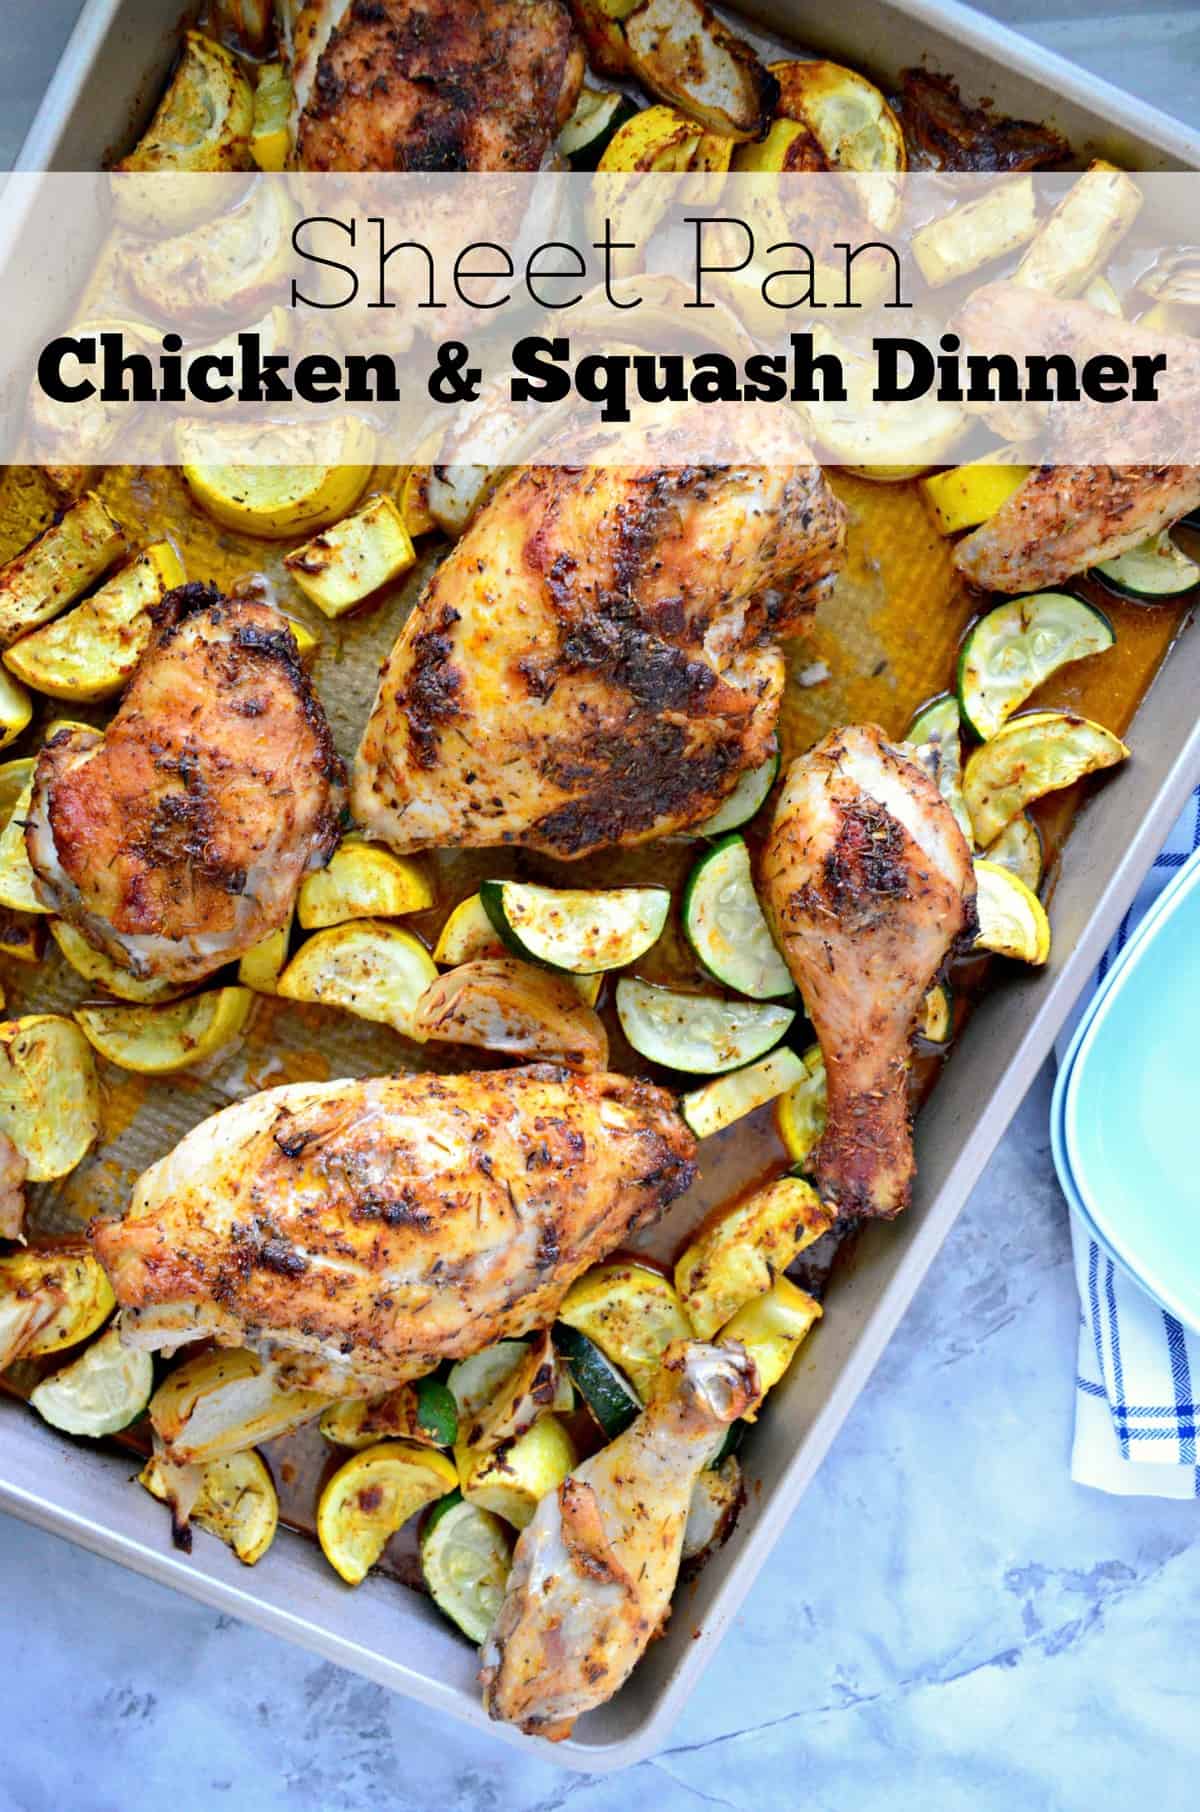 top view of browned chicken and sliced zucchini and squash on sheet pan with title text.